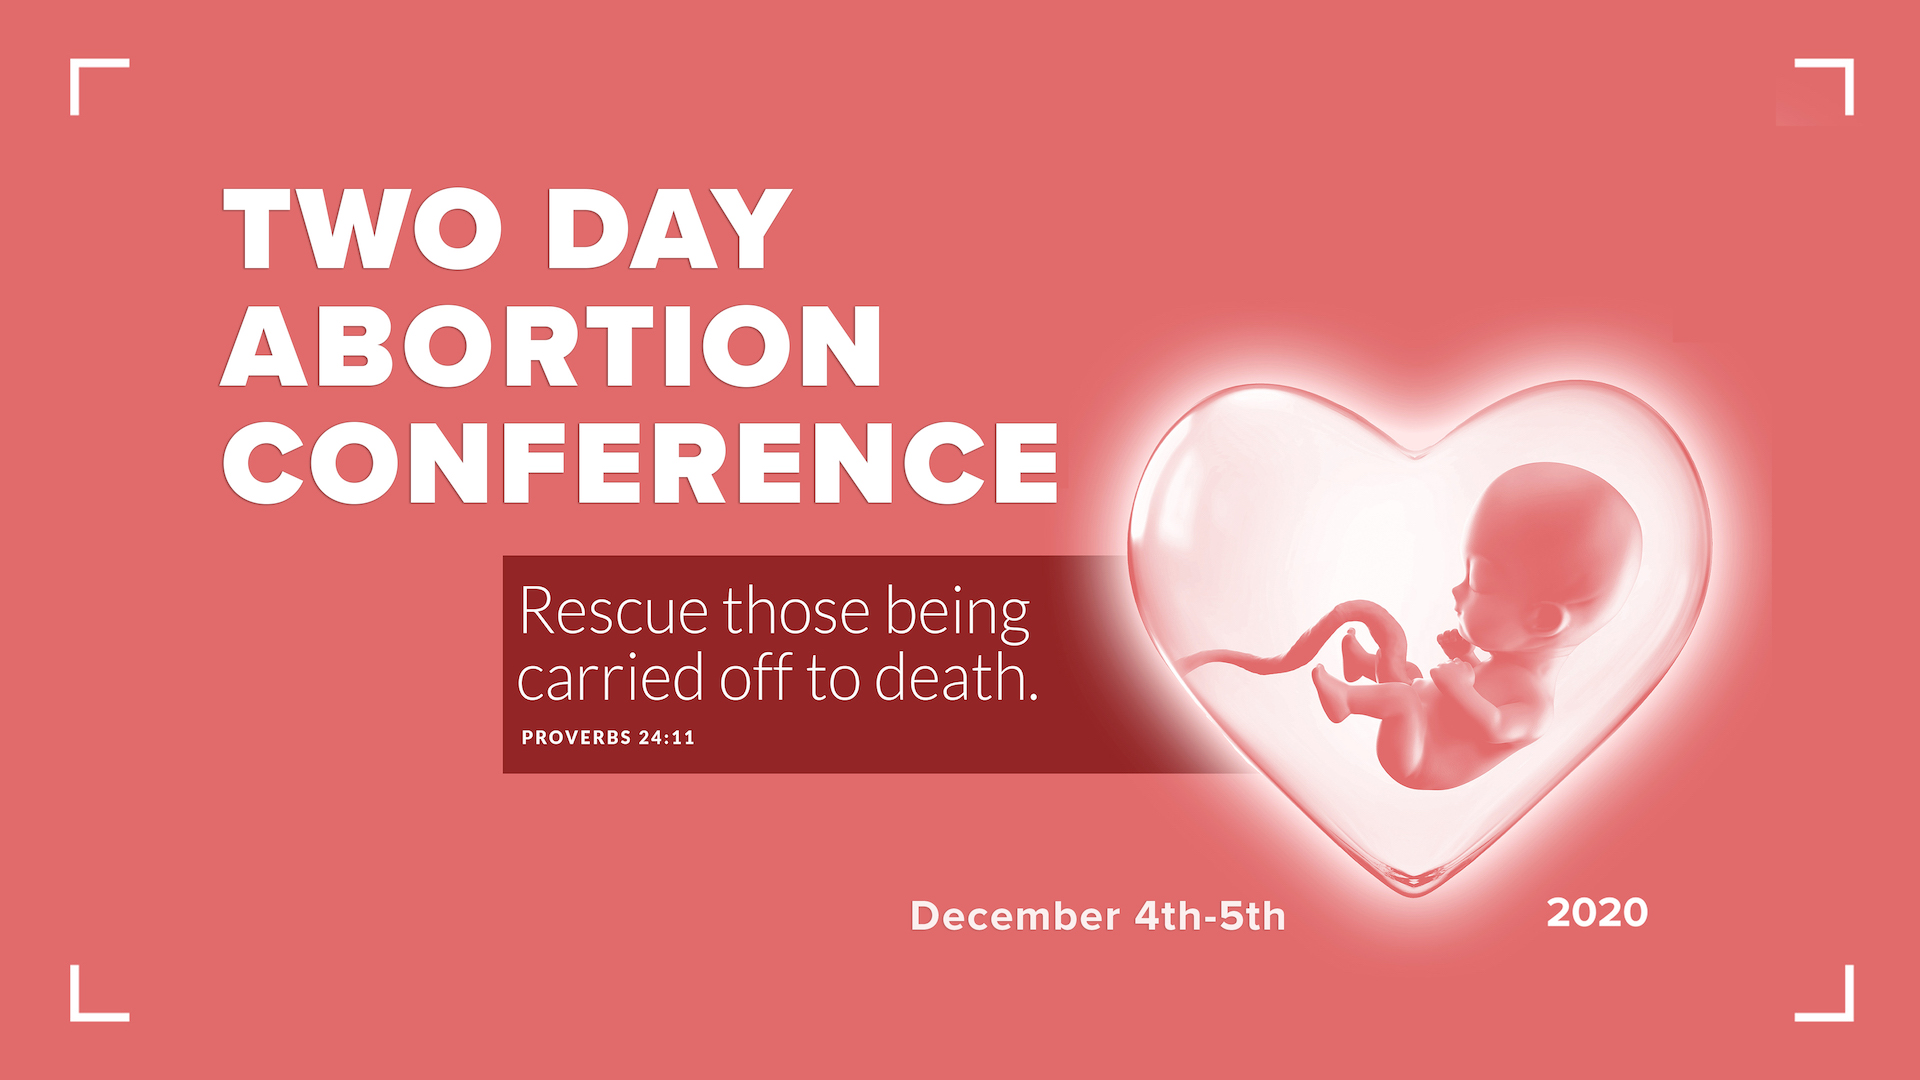 Two Day Abortion Conference